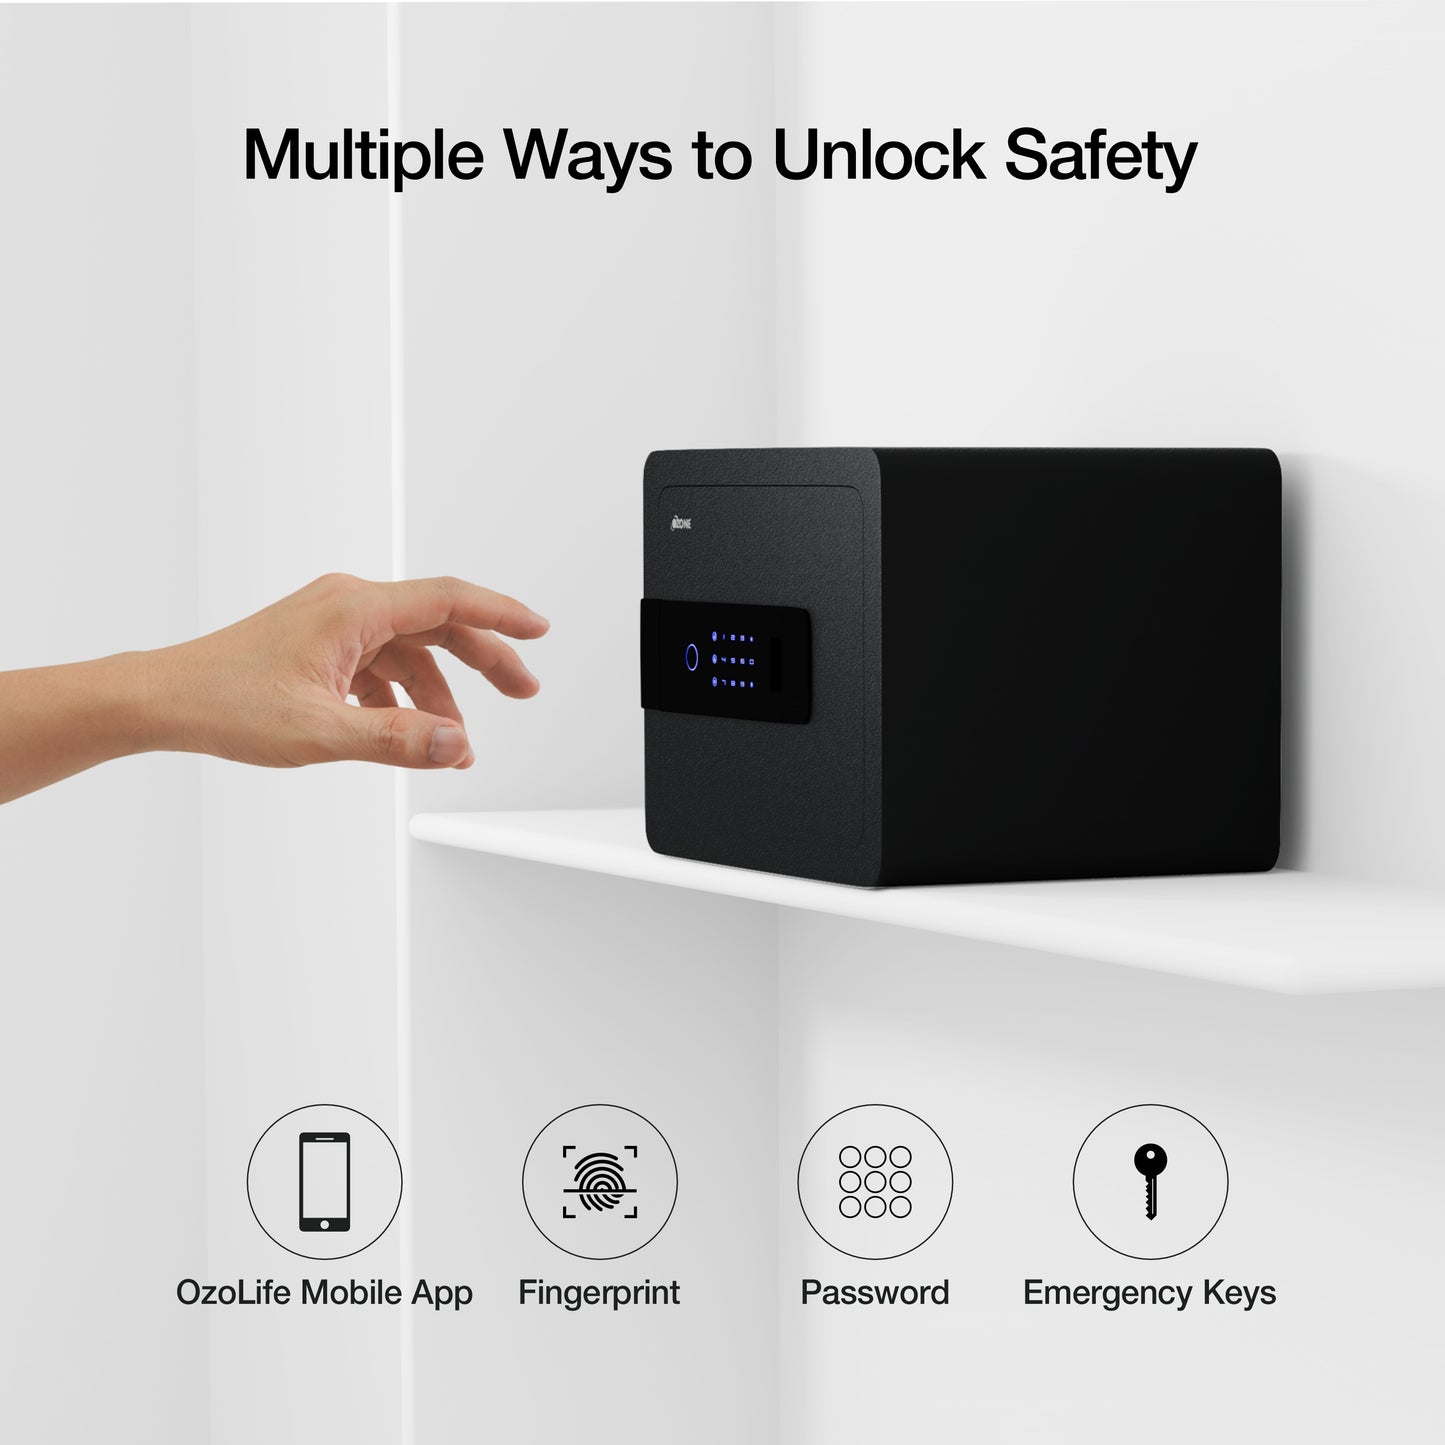 Ozone Mobile App-enabled Wi-Fi Safe for Homes & Offices | 4-way Access | Mobile App, Fingerprint, Password & Emergency Key (30 Ltrs.)